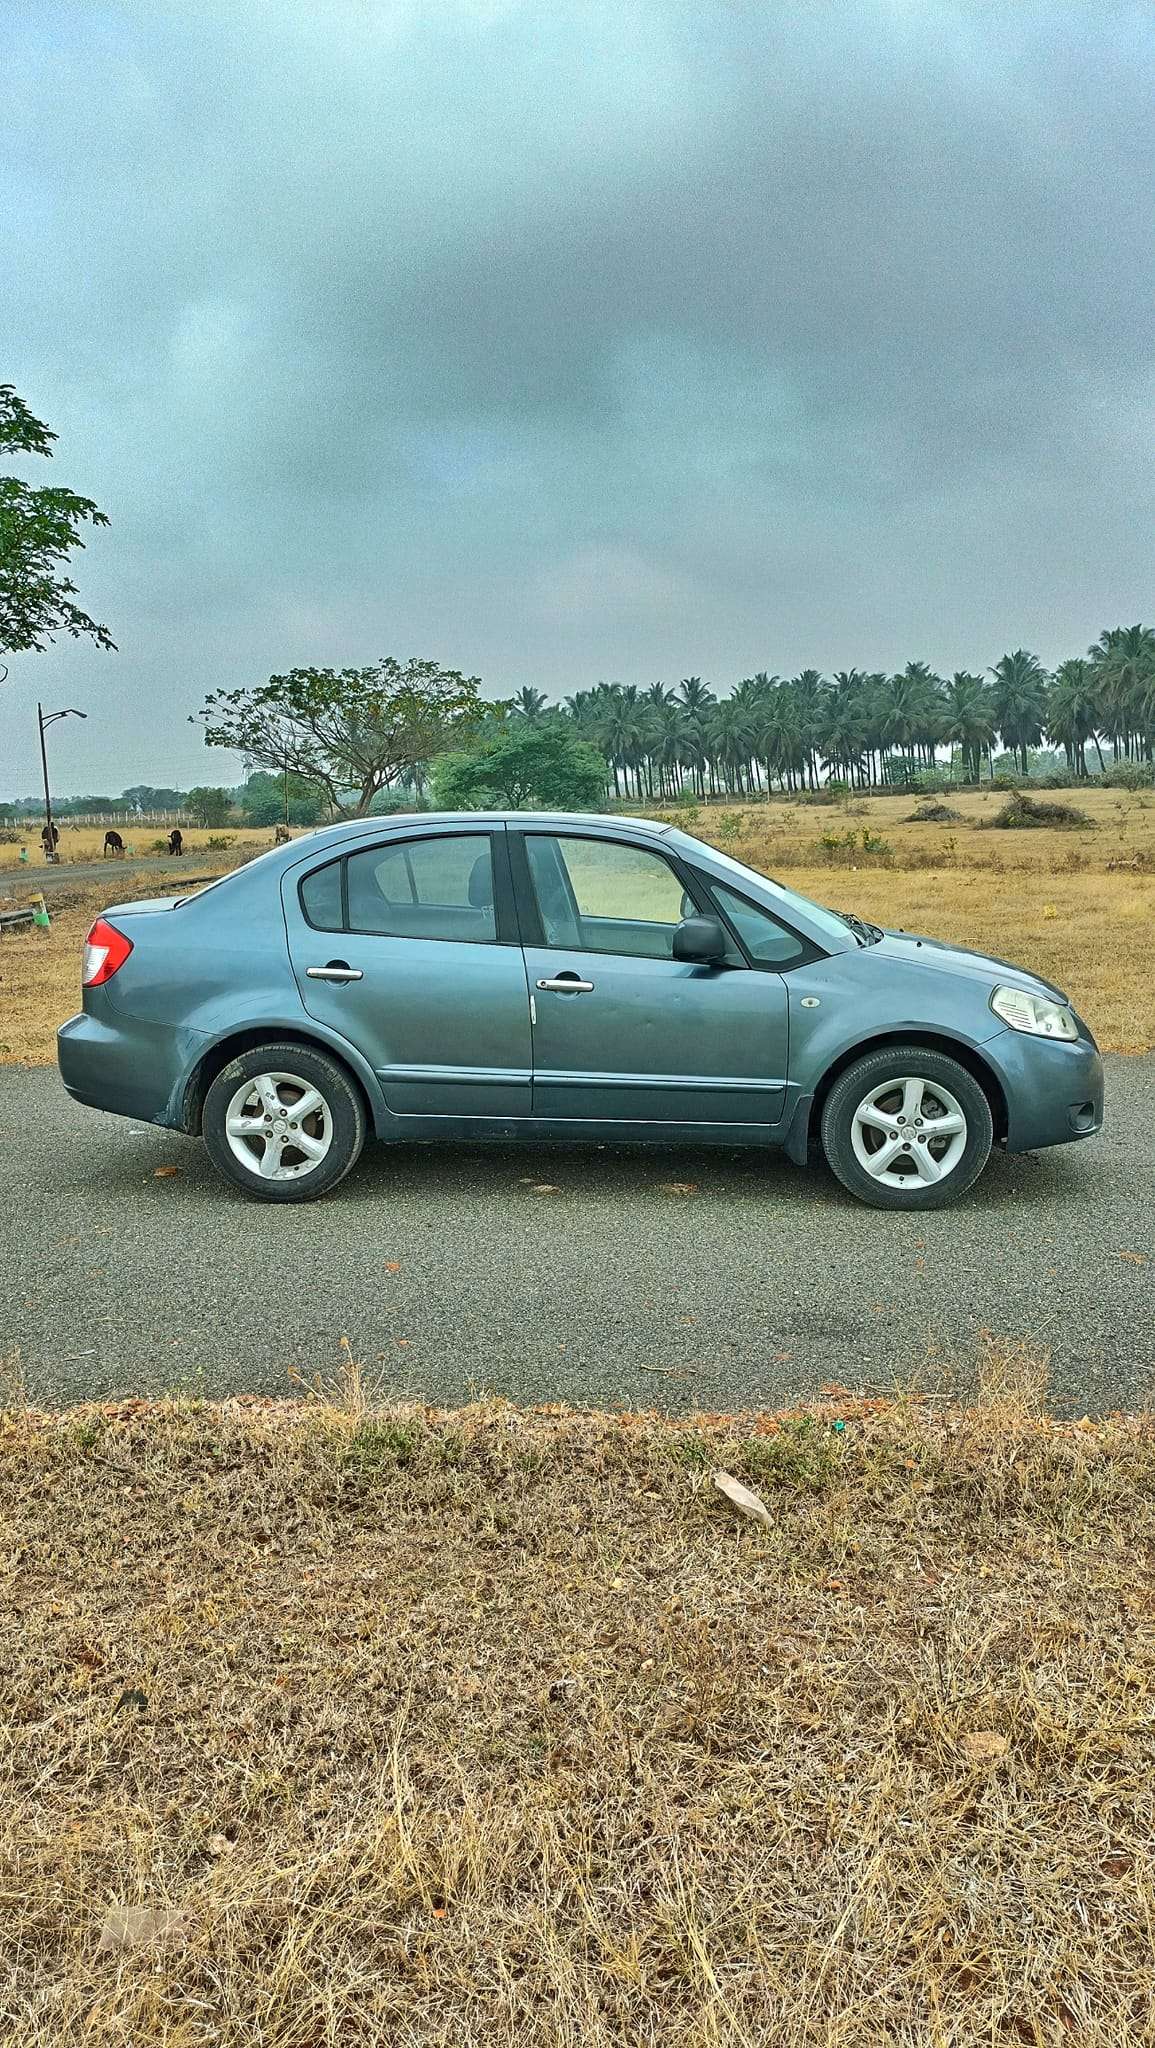 3112-for-sale-Maruthi-Suzuki-SX4-Petrol-First-Owner-2008-TN-registered-rs-195000